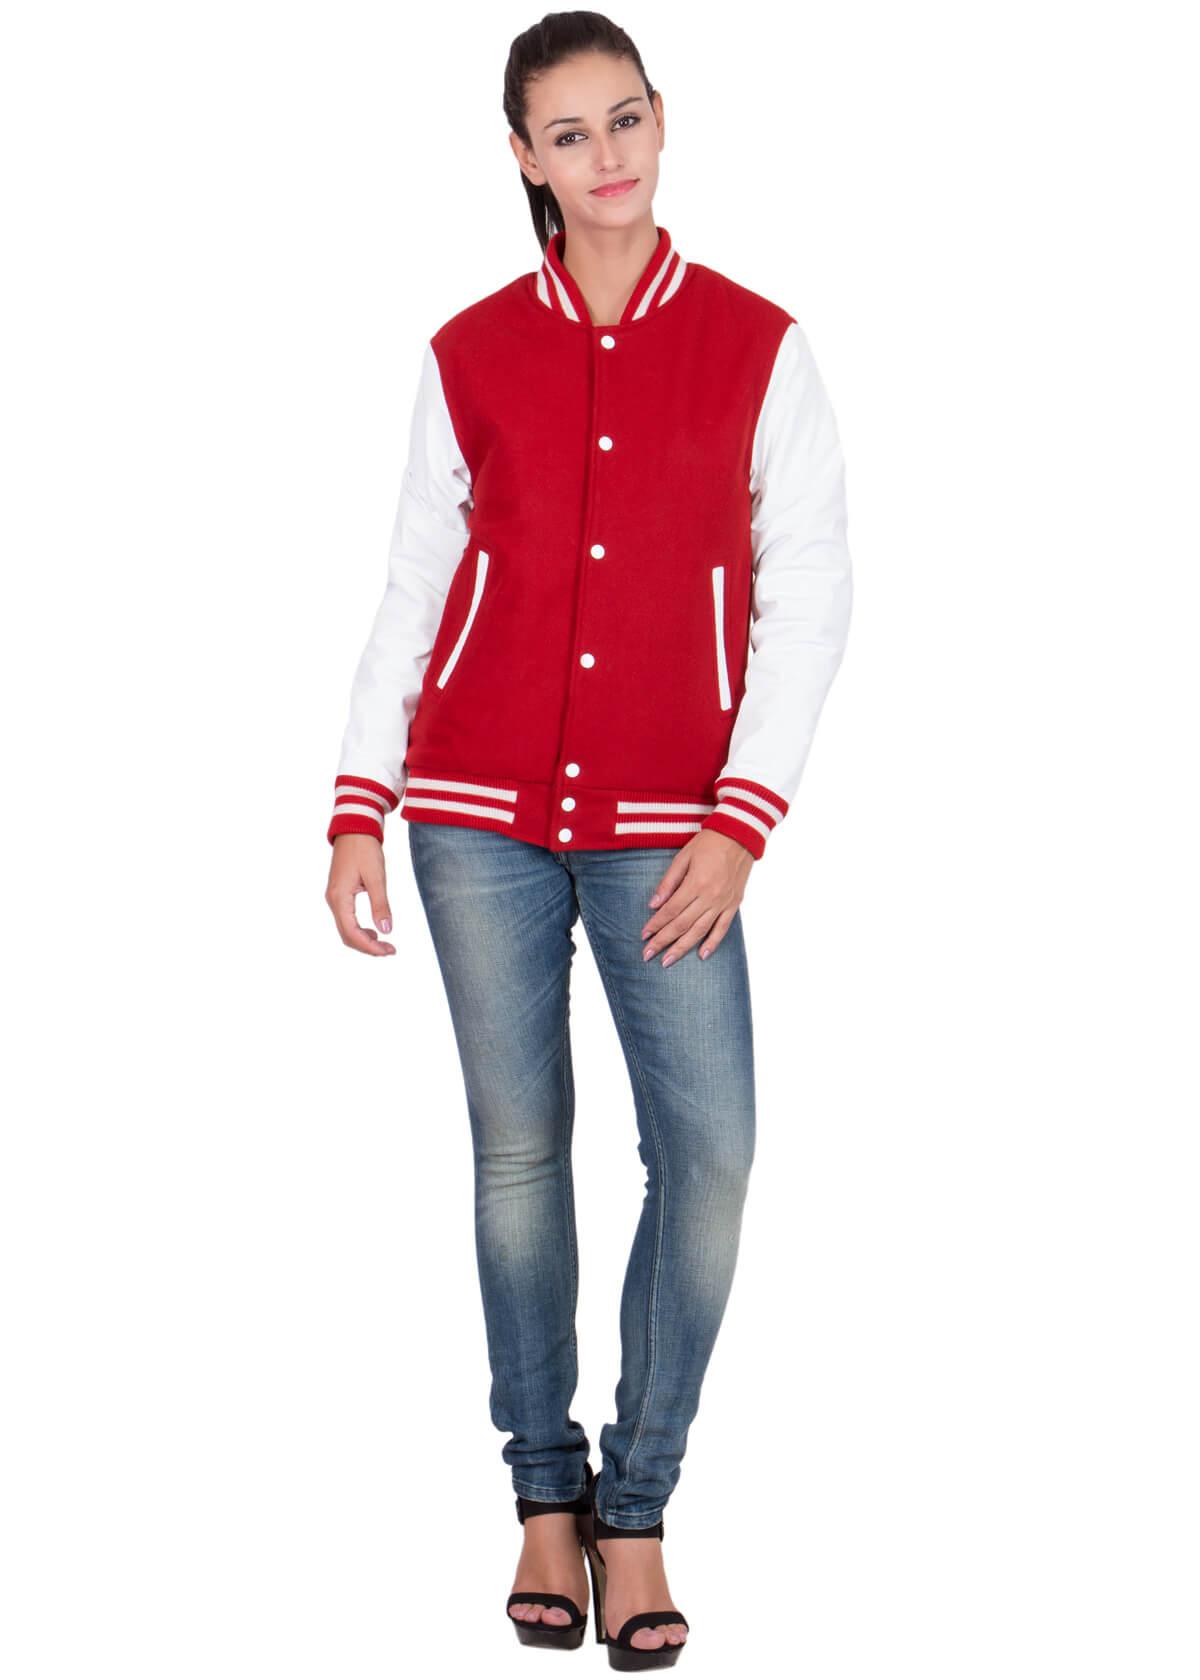 Womens Scarlet Red Varsity Jacket with White Leather Sleeves-1